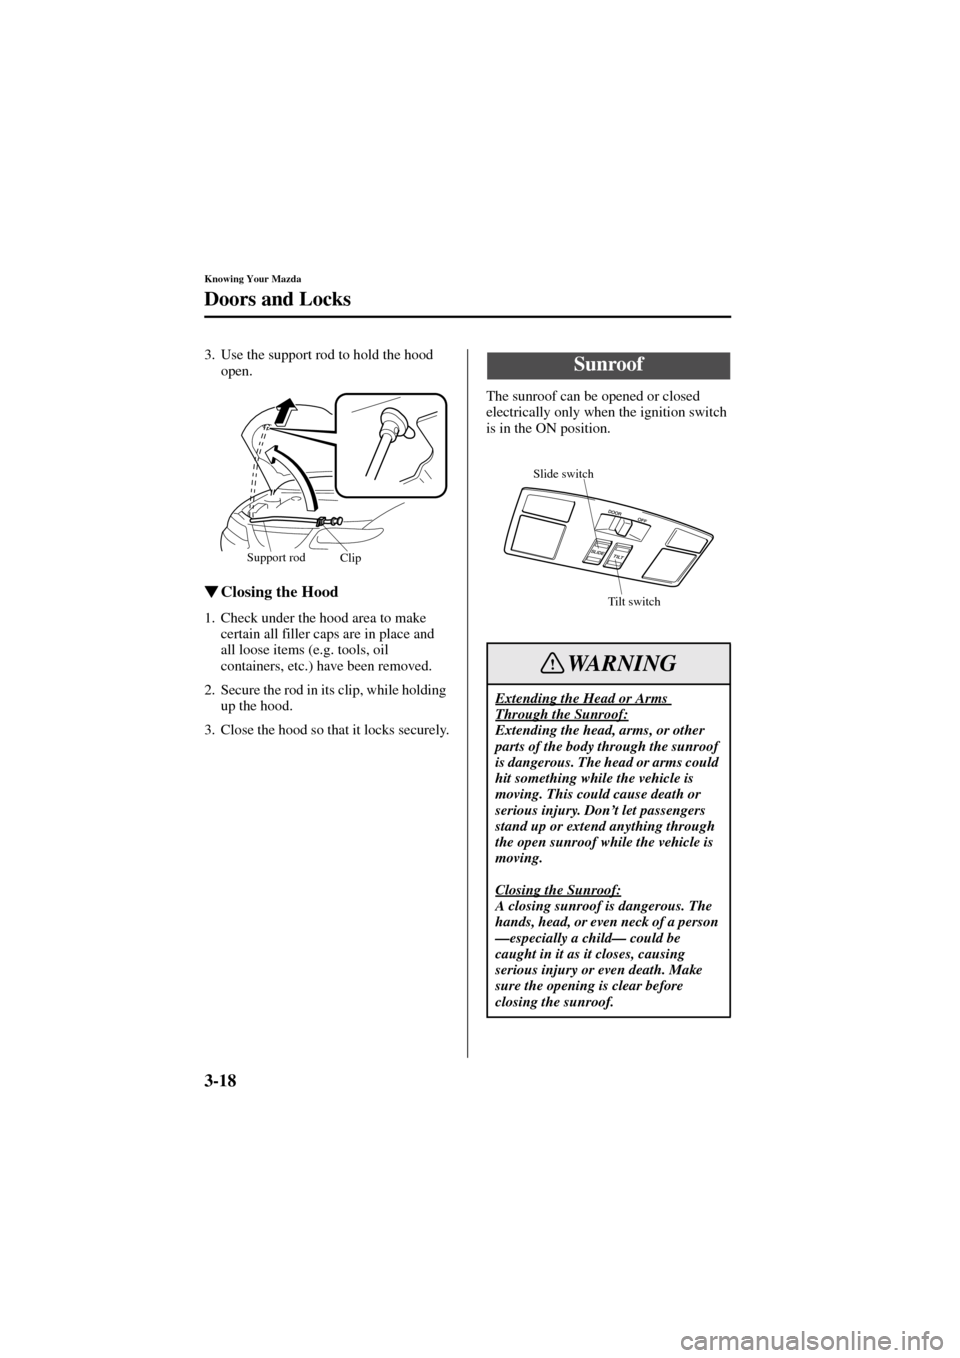 MAZDA MODEL 6 2004  Owners Manual (in English) 3-18
Knowing Your Mazda
Doors and Locks
Form No. 8R29-EA-02I
3. Use the support rod to hold the hood 
open.
Closing the Hood
1. Check under the hood area to make 
certain all filler caps are in place